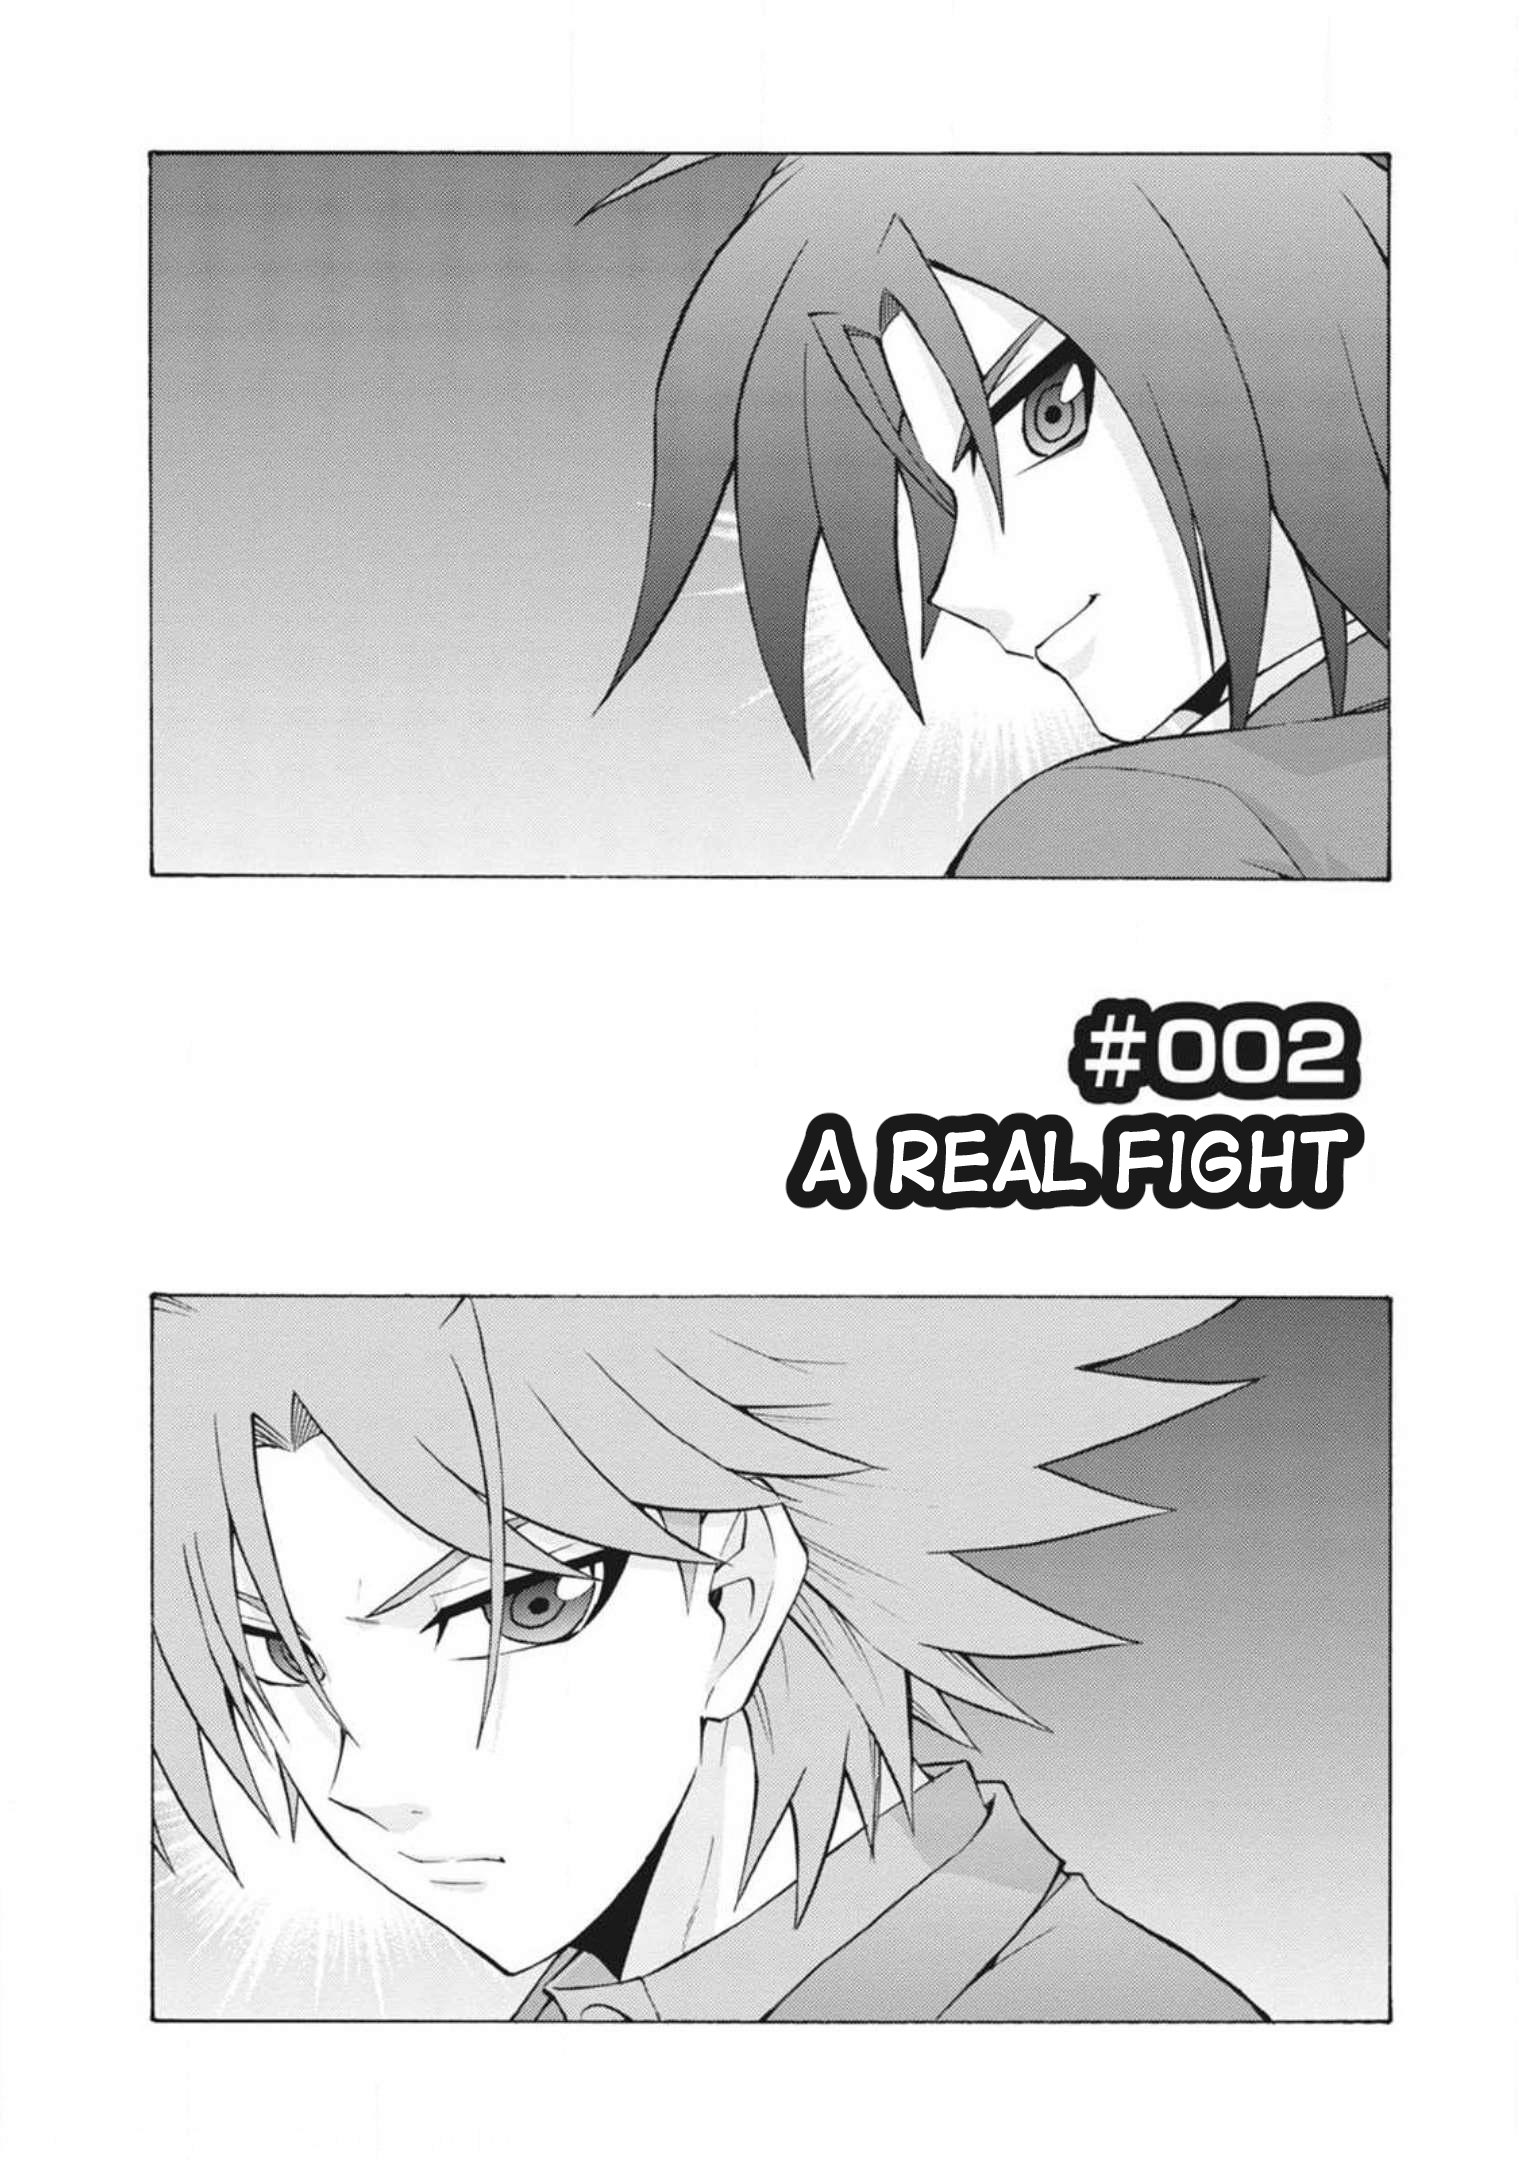 Cardfight!! Vanguard: Turnabout Vol.1 Chapter 2: A Real Fight - Picture 2